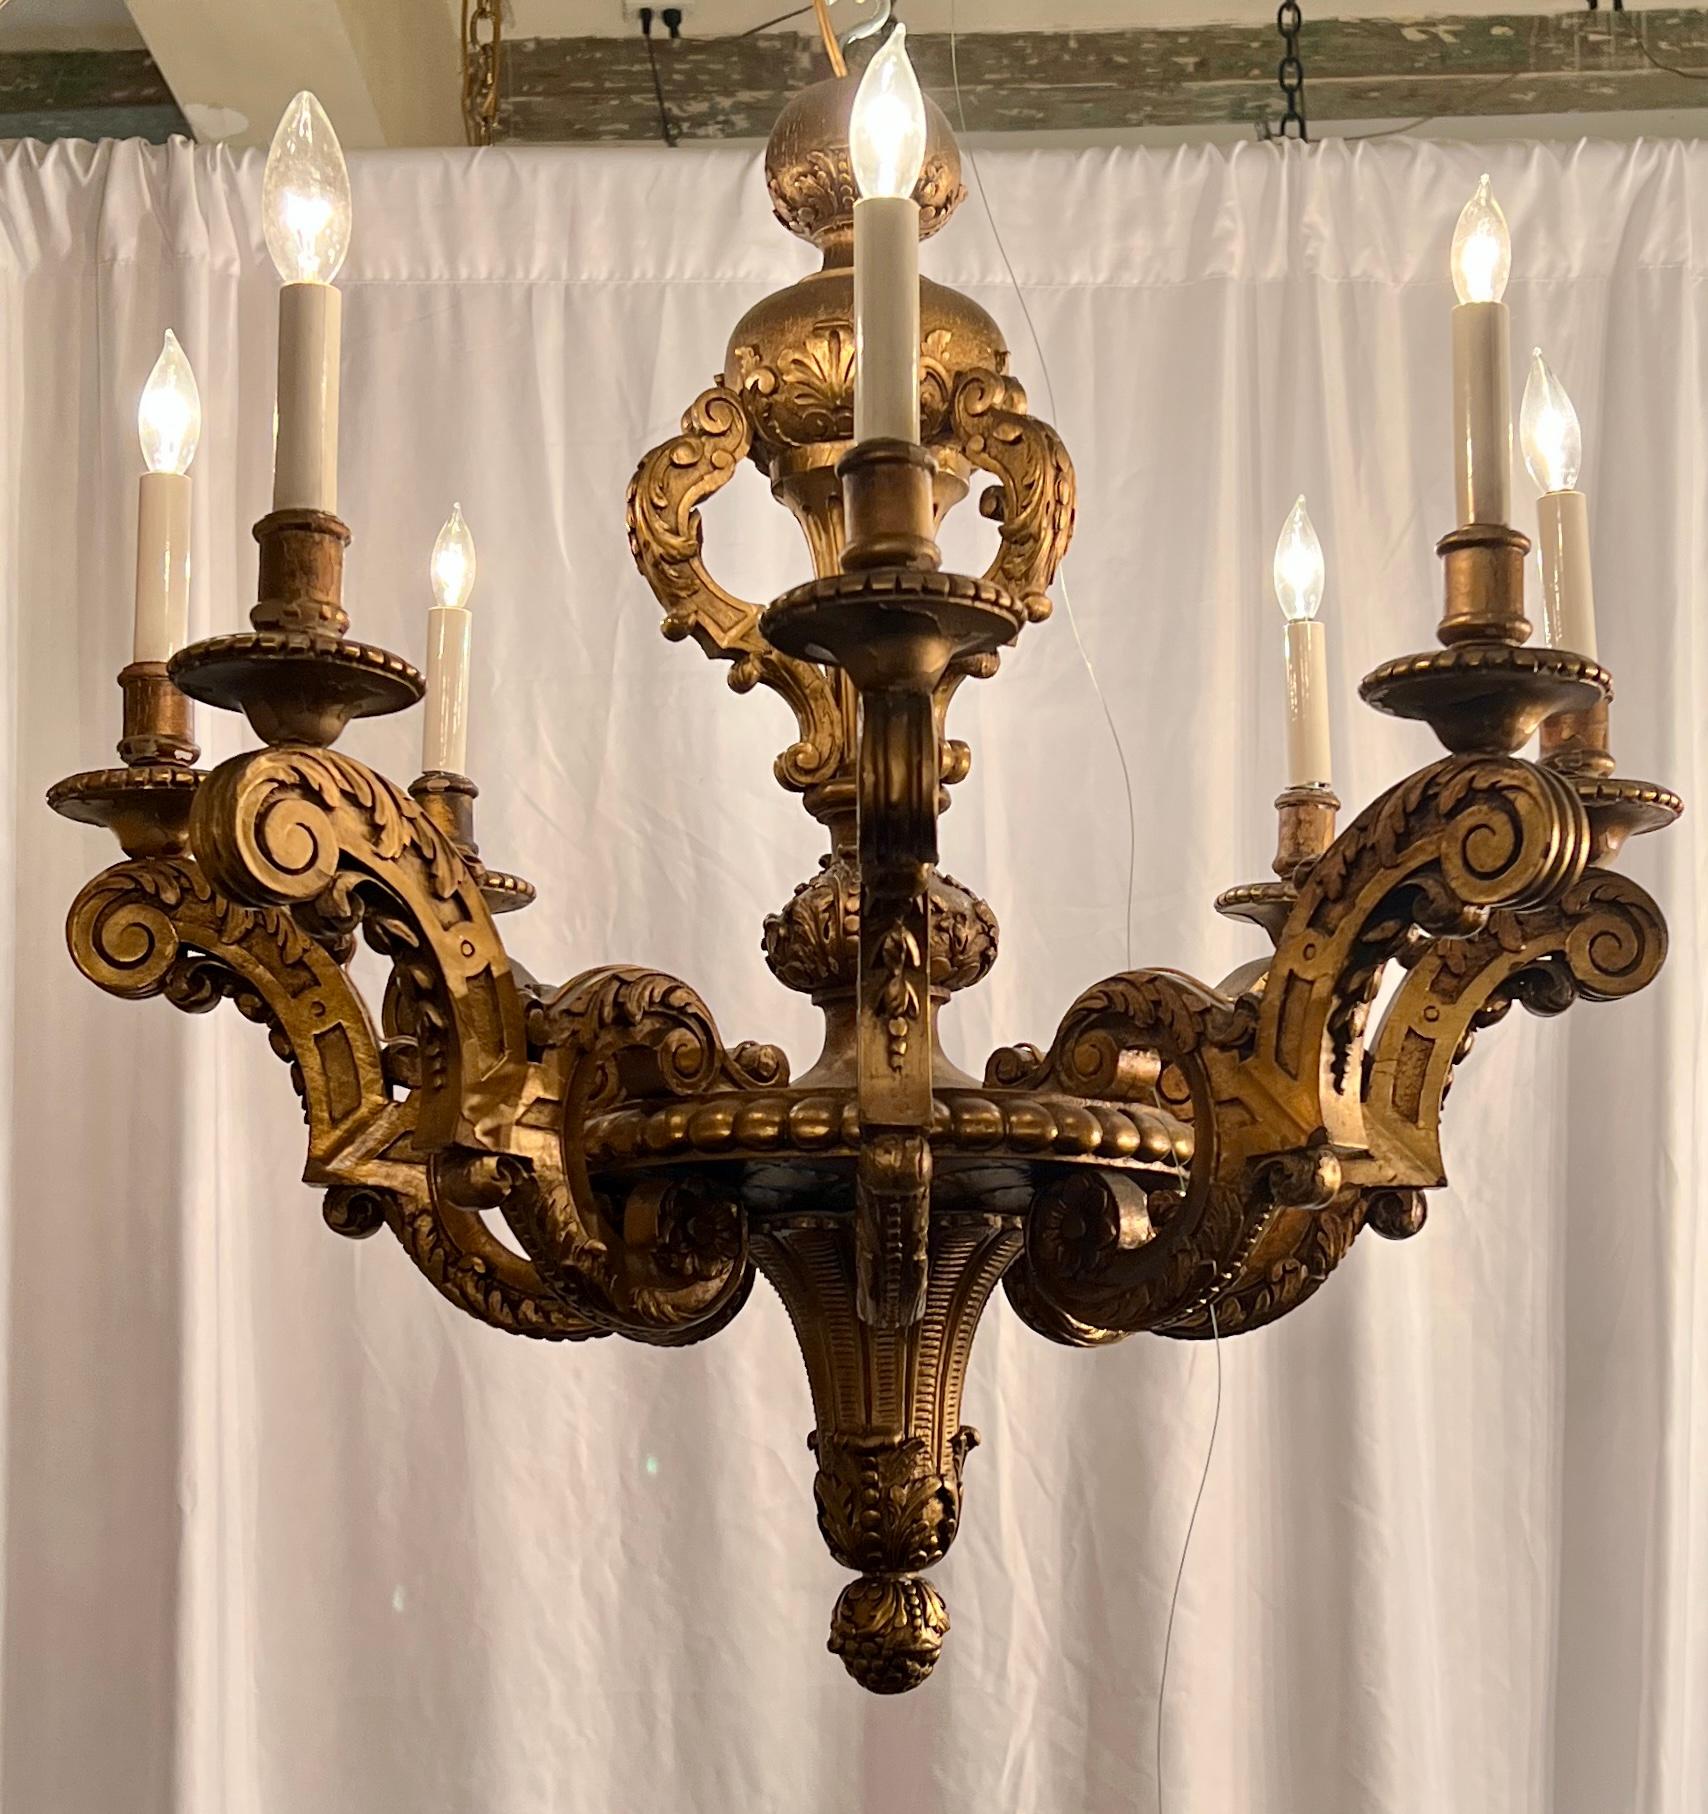 Antique Late 19th Century Italian Carved Wood Parcel Gilt Chandelier, Circa 1890-1900.